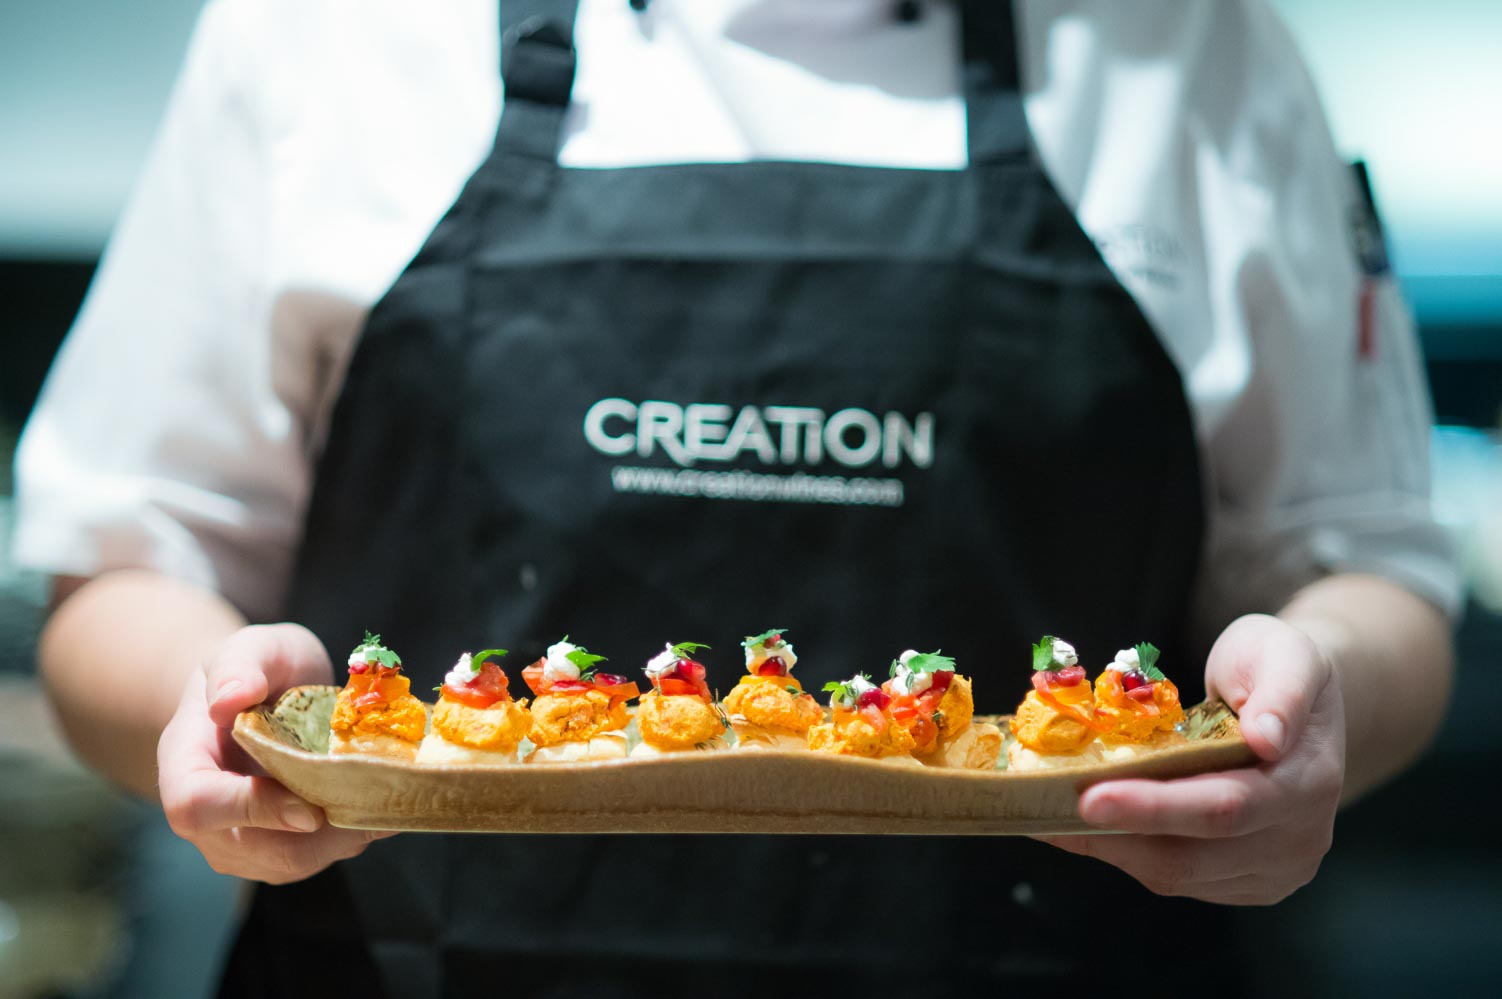 Creation on the move - Experience Creation Canapé Pairing  - 6 canapés, 8 wines